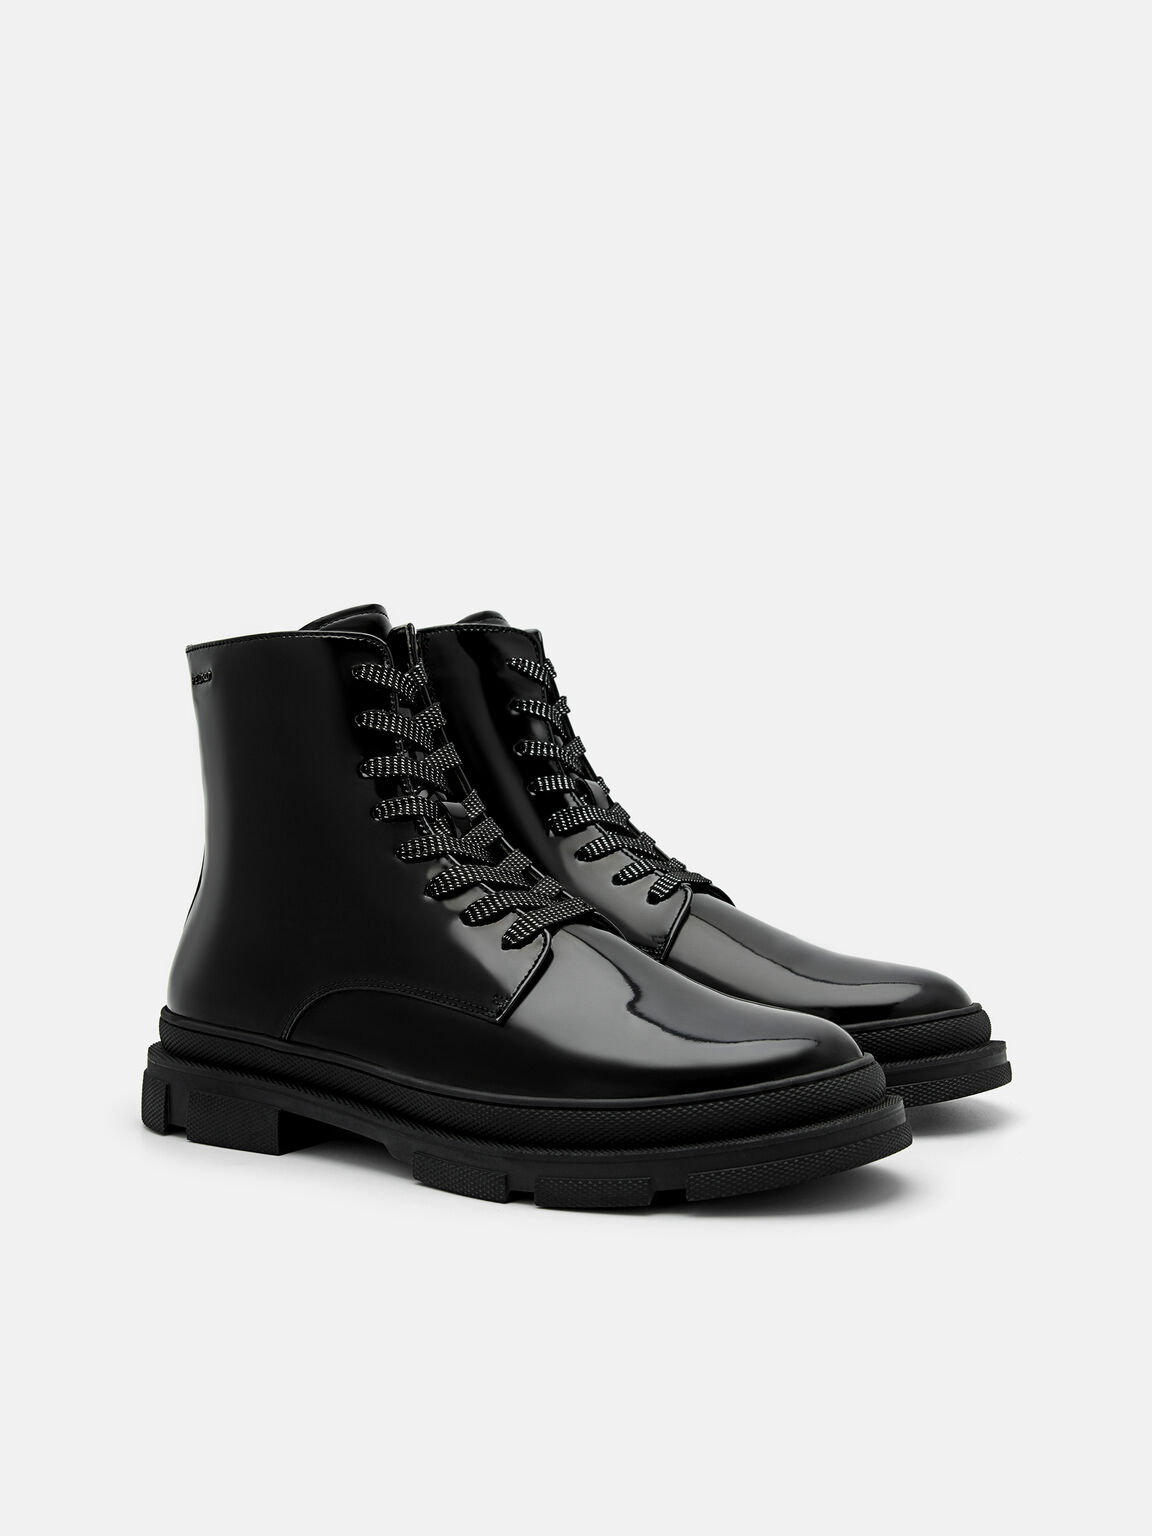 Leather Side-Zip Boots, Black